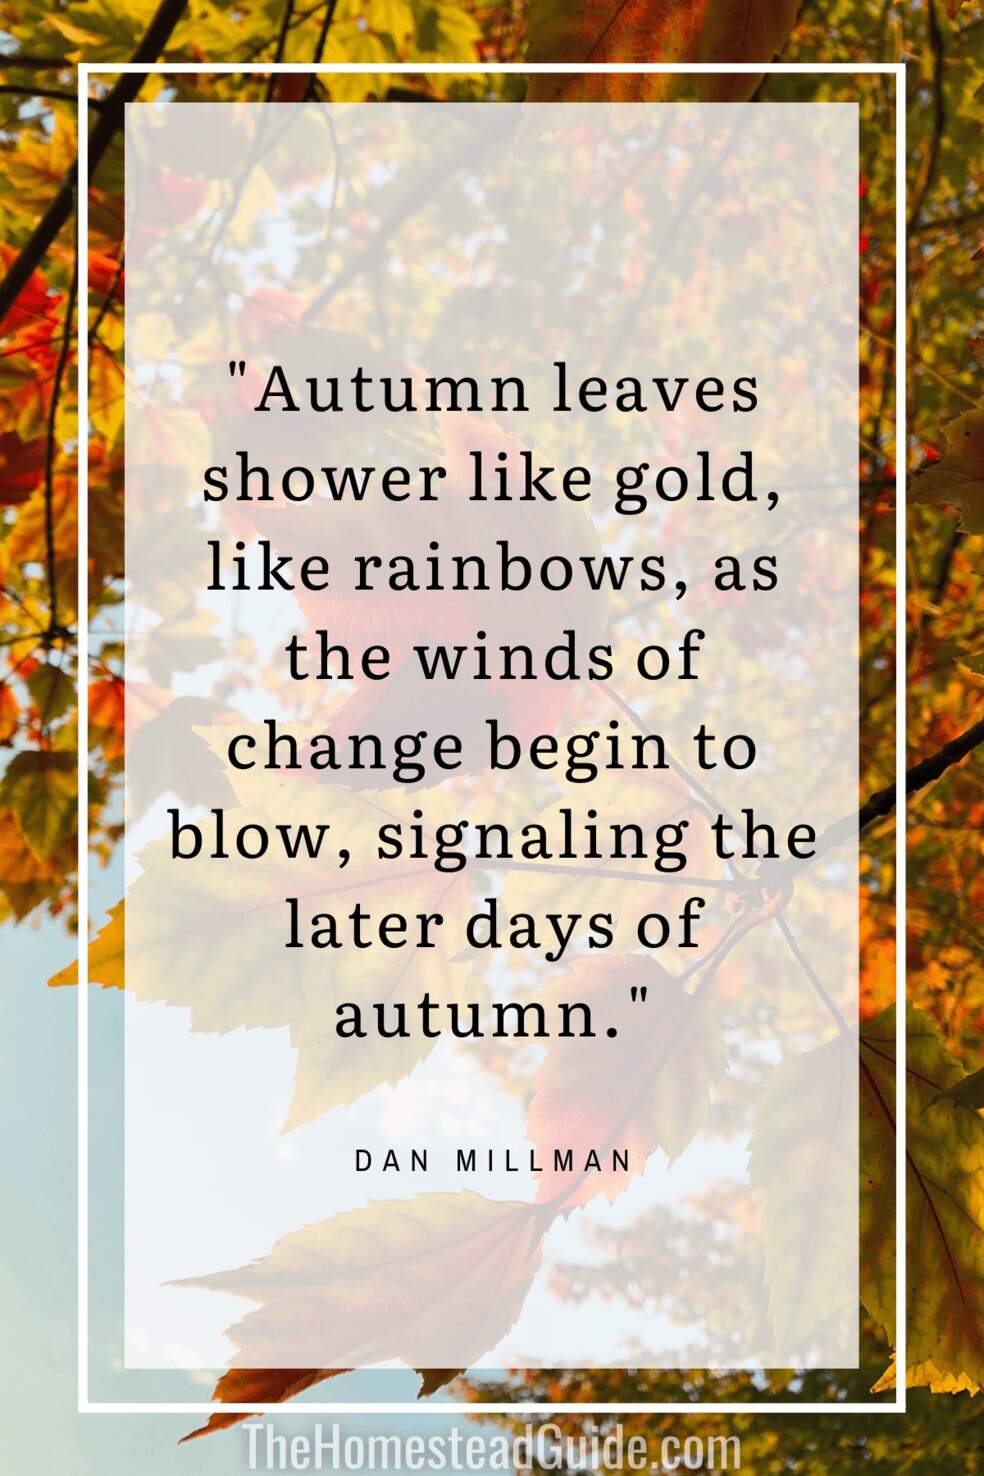 Autumn leaves shower like gold, like rainbows, as the winds of change begin to blow, signaling the later days of autumn.